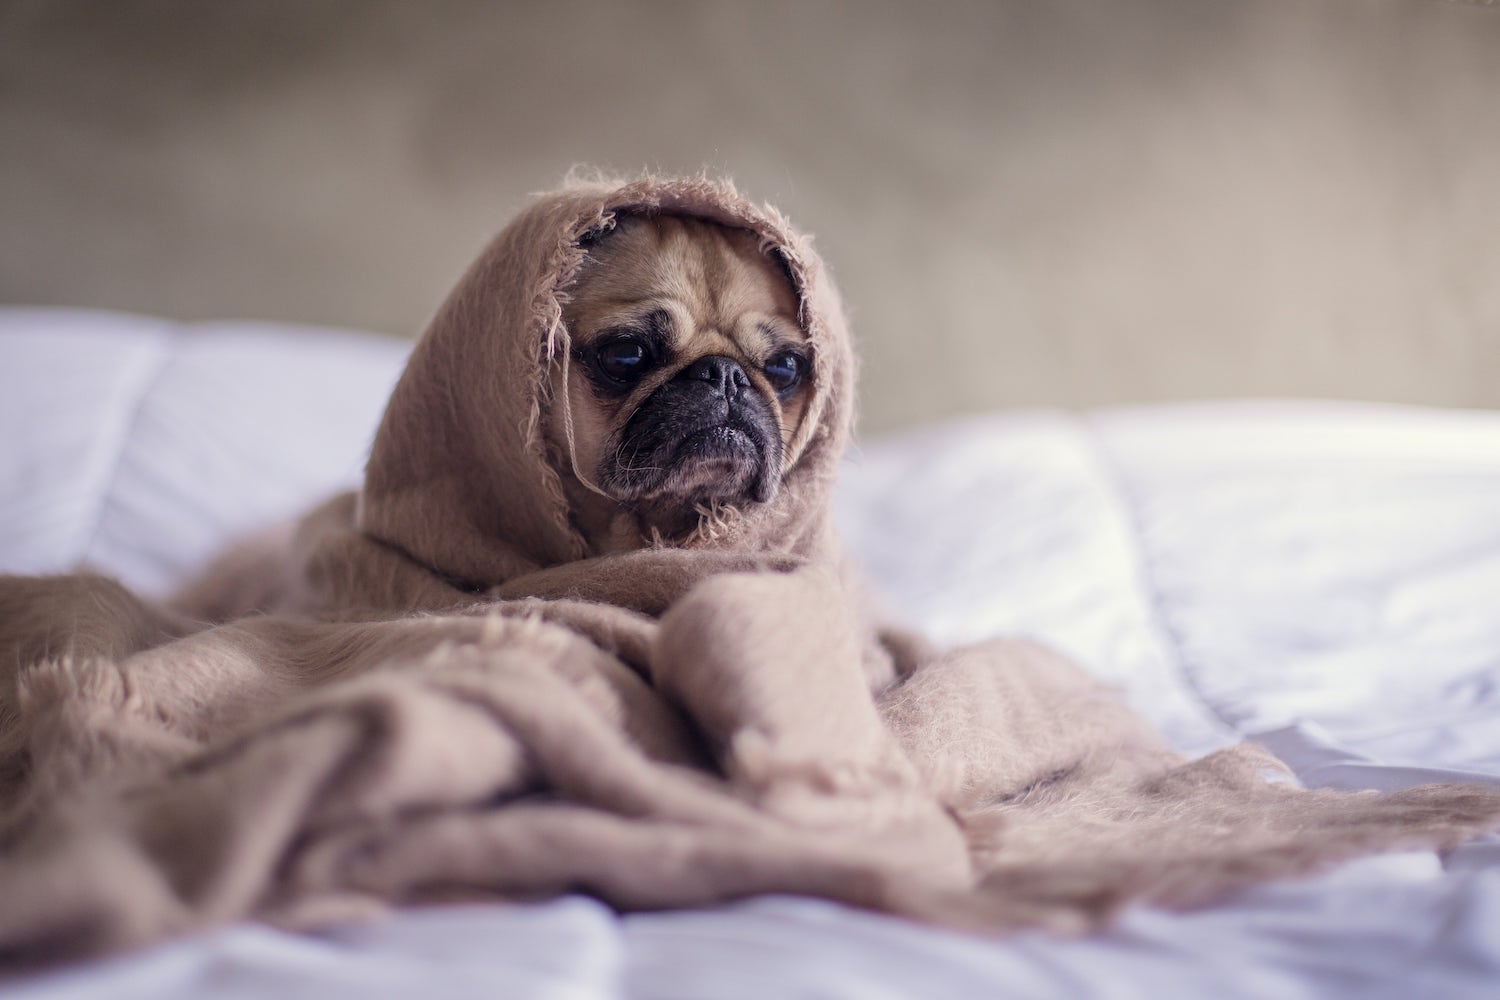 Puppy with Anxiety Wrapped up in Blanket on Bed